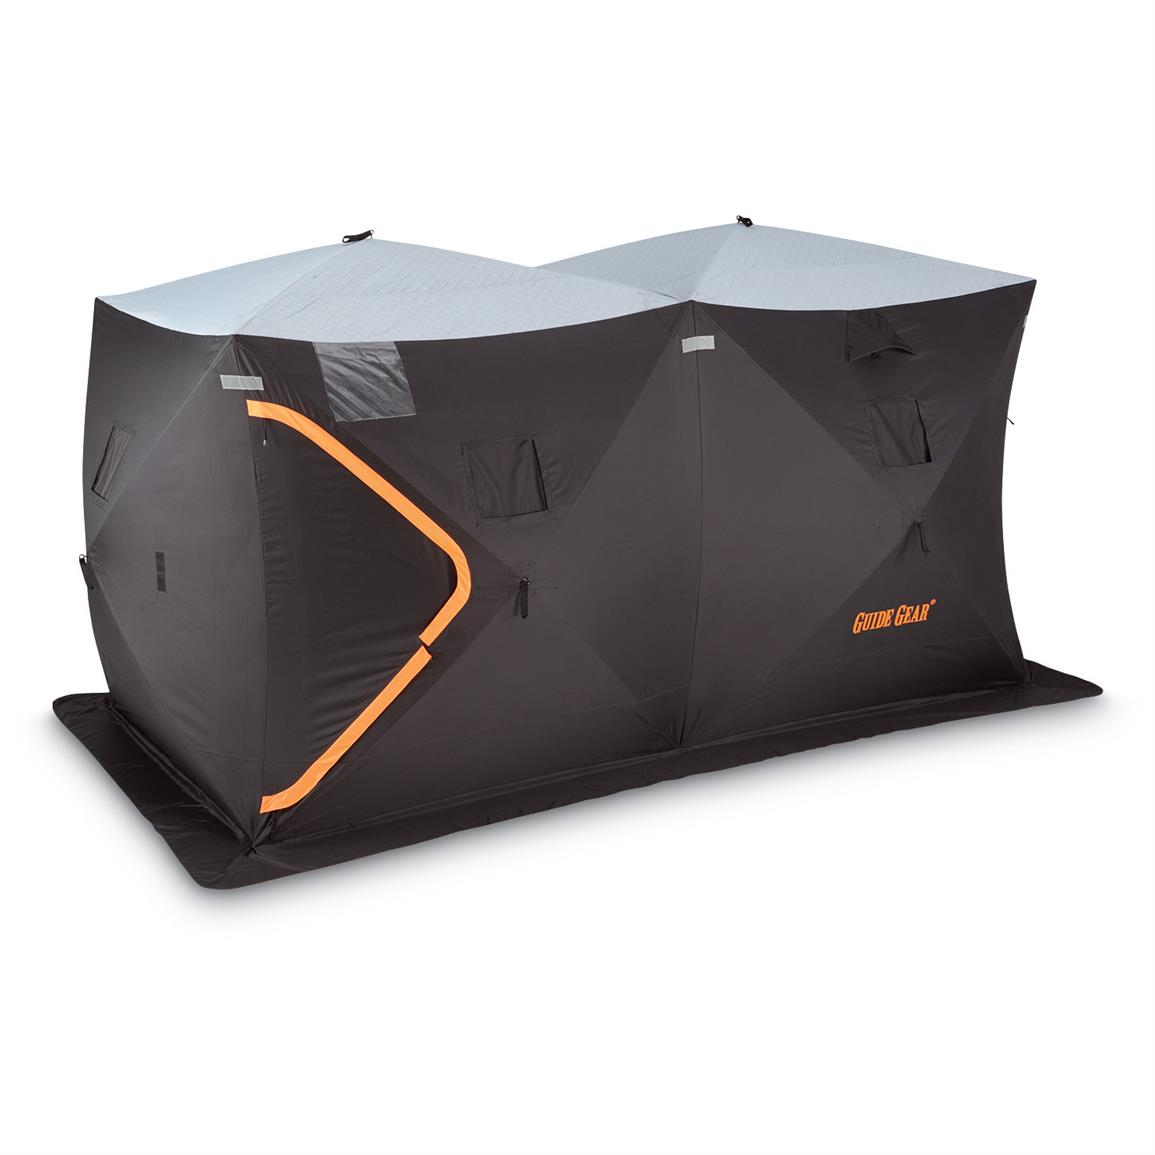 Guide Gear Insulated Ice Fishing Shelter, 6' x 12